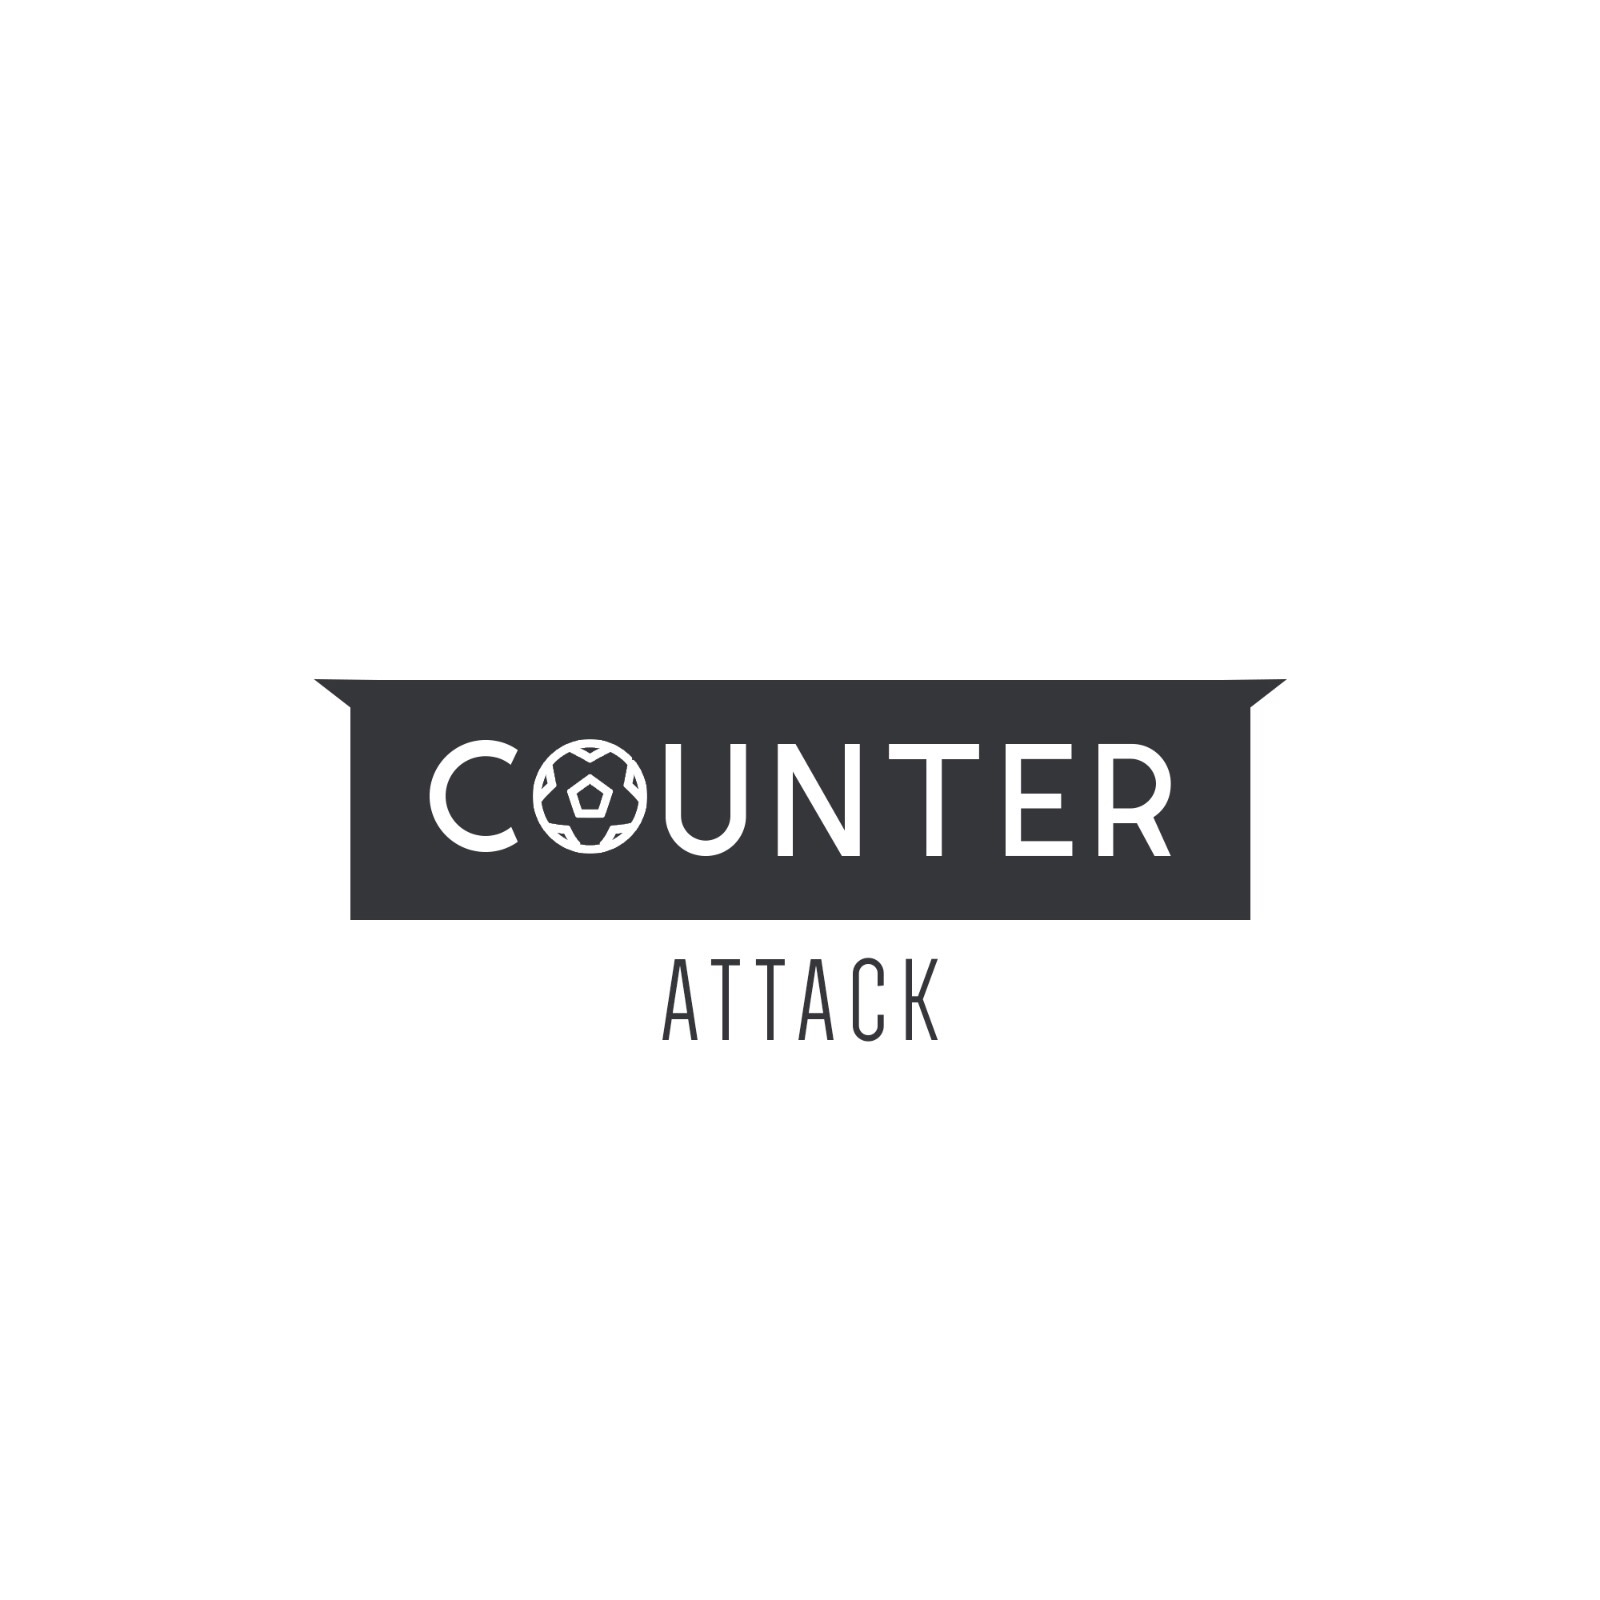 Counter Attack - Episode 137 - Reeco Hackett-Fairchild Backing Himself To Succeed!